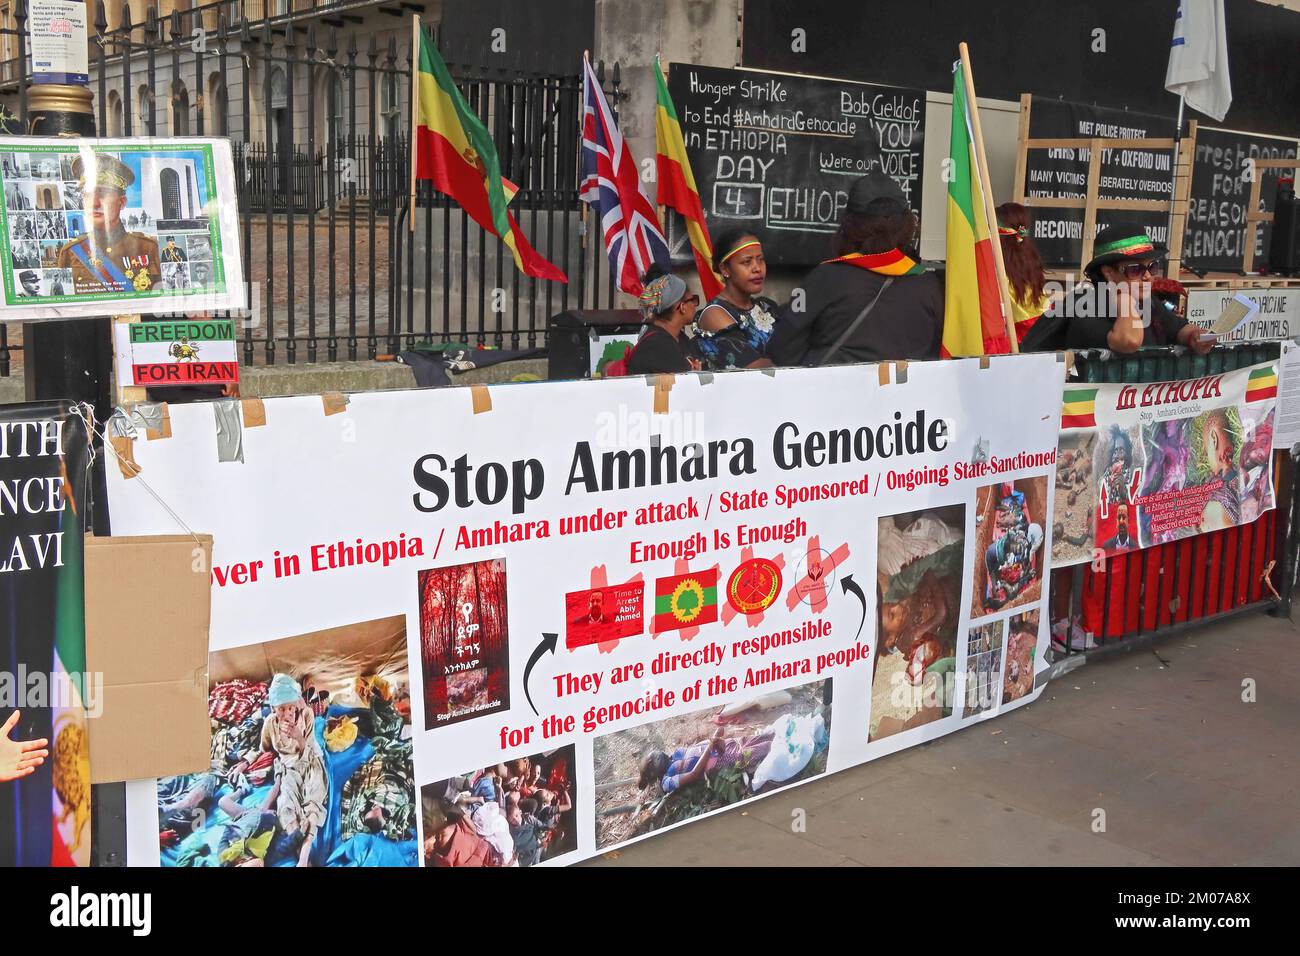 Stop Amhara Genocide, Ethiopia - Whitehall Protest, City of Westminster, London, England, UK, SW1 Stock Photo